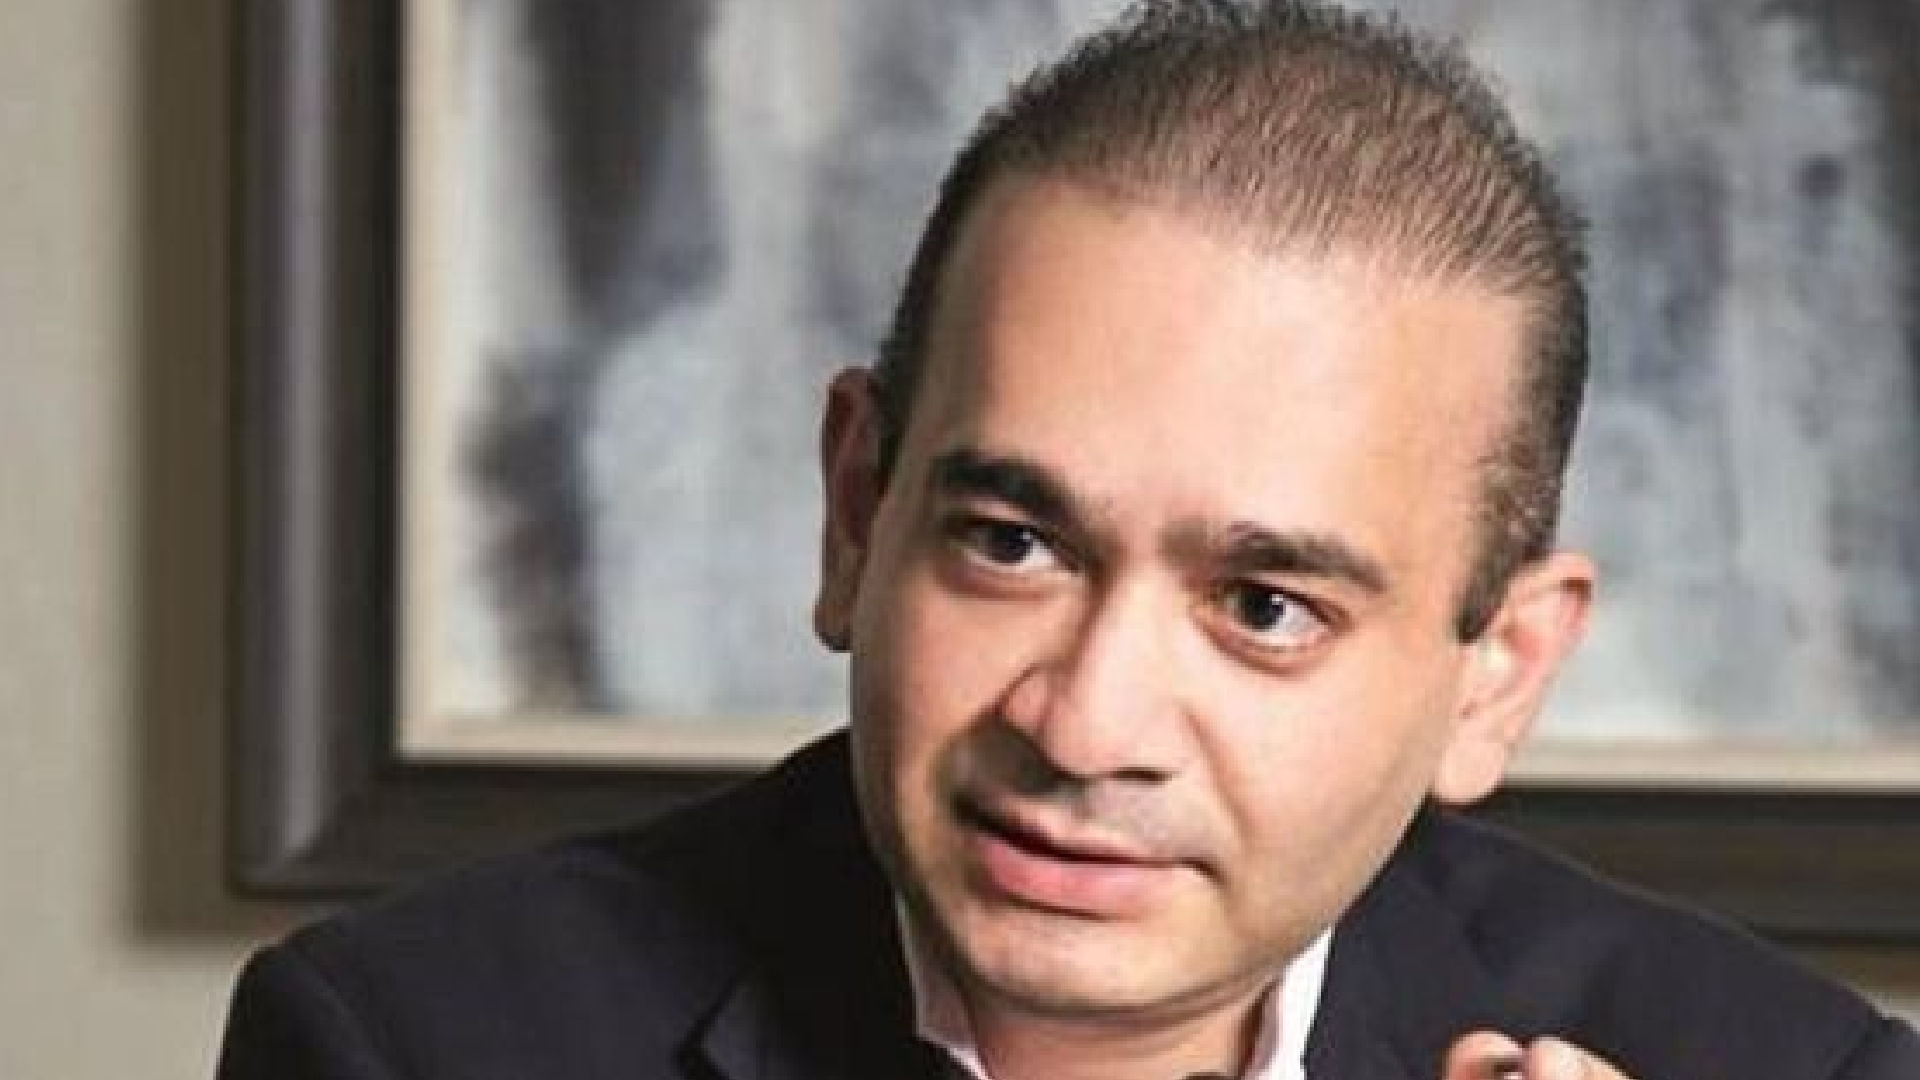 All about Nirav Modi, the fugitive diamantaire who will be extradited to India from UK